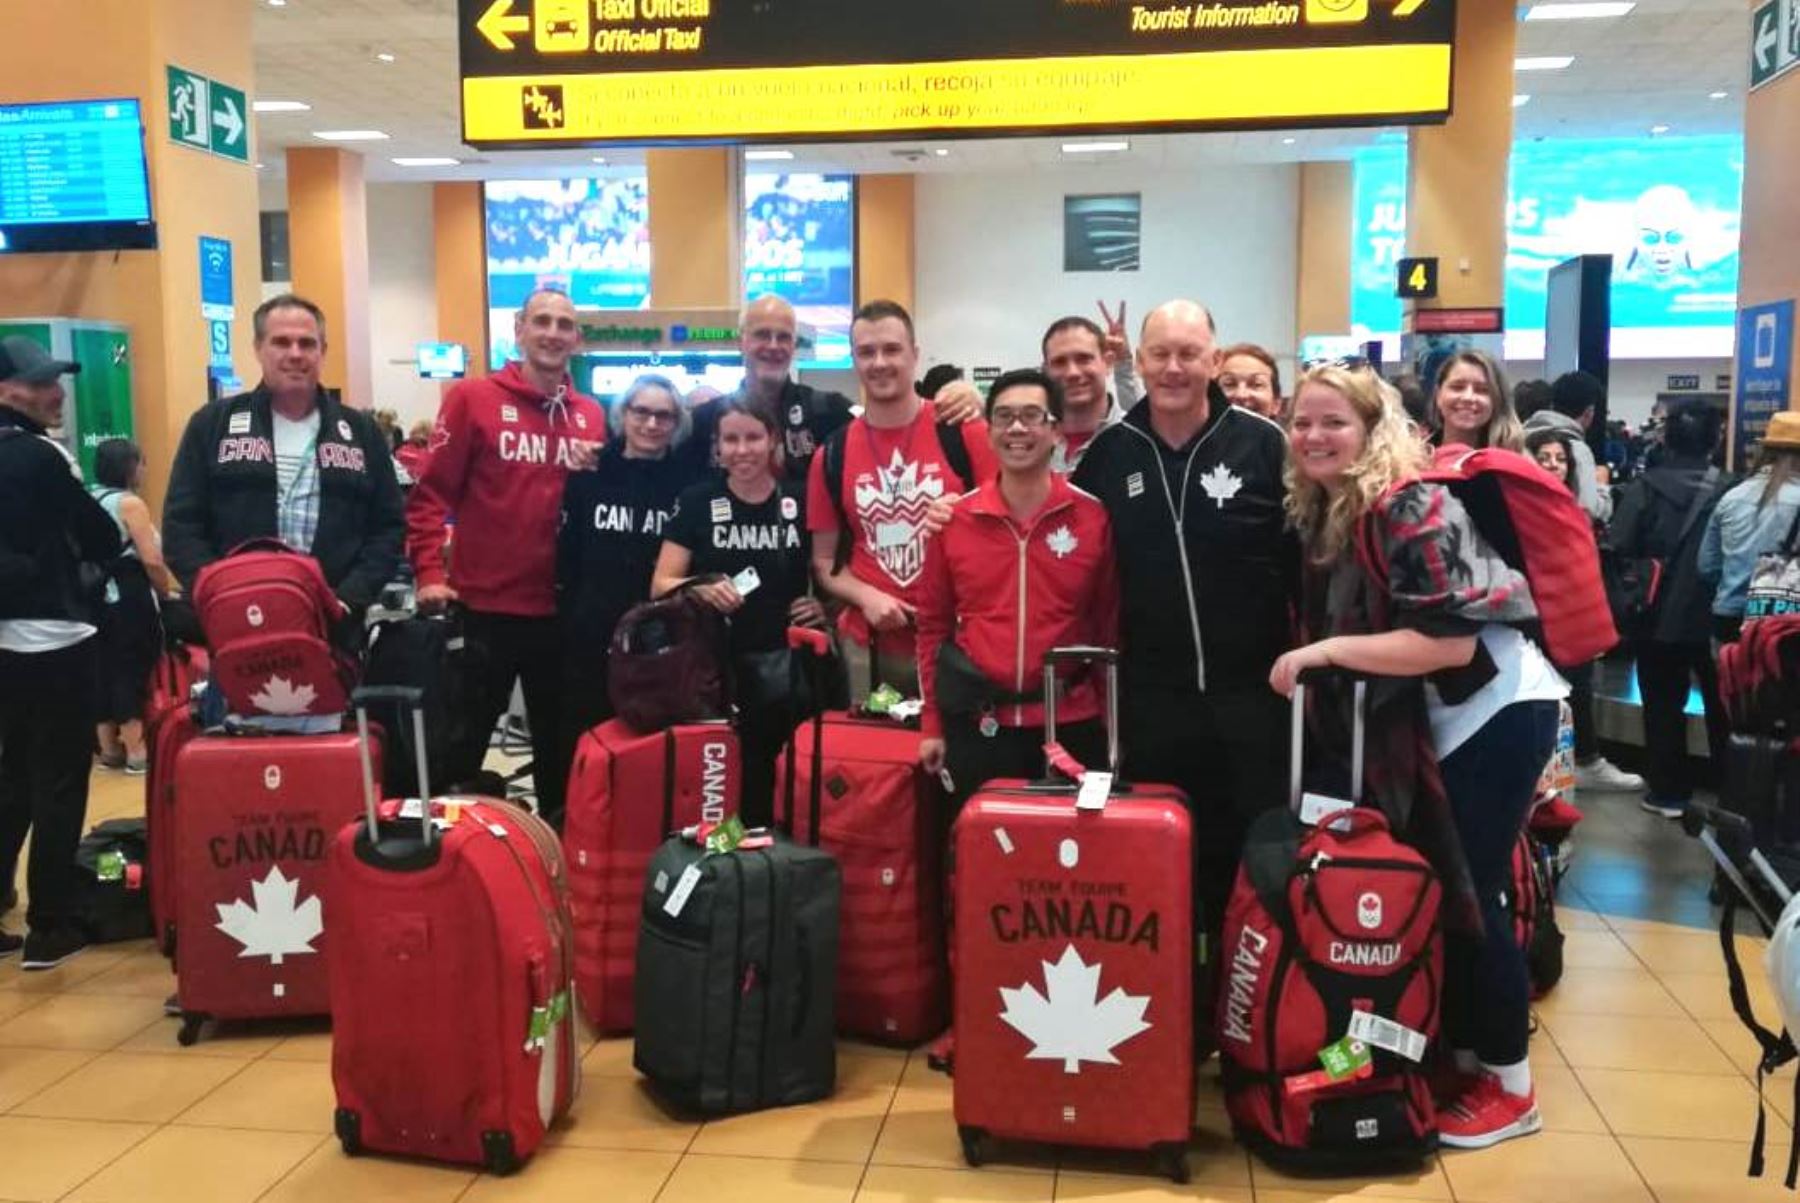 Lima 2019: more than 500 Canadian athletes have started arriving in Peru |  information